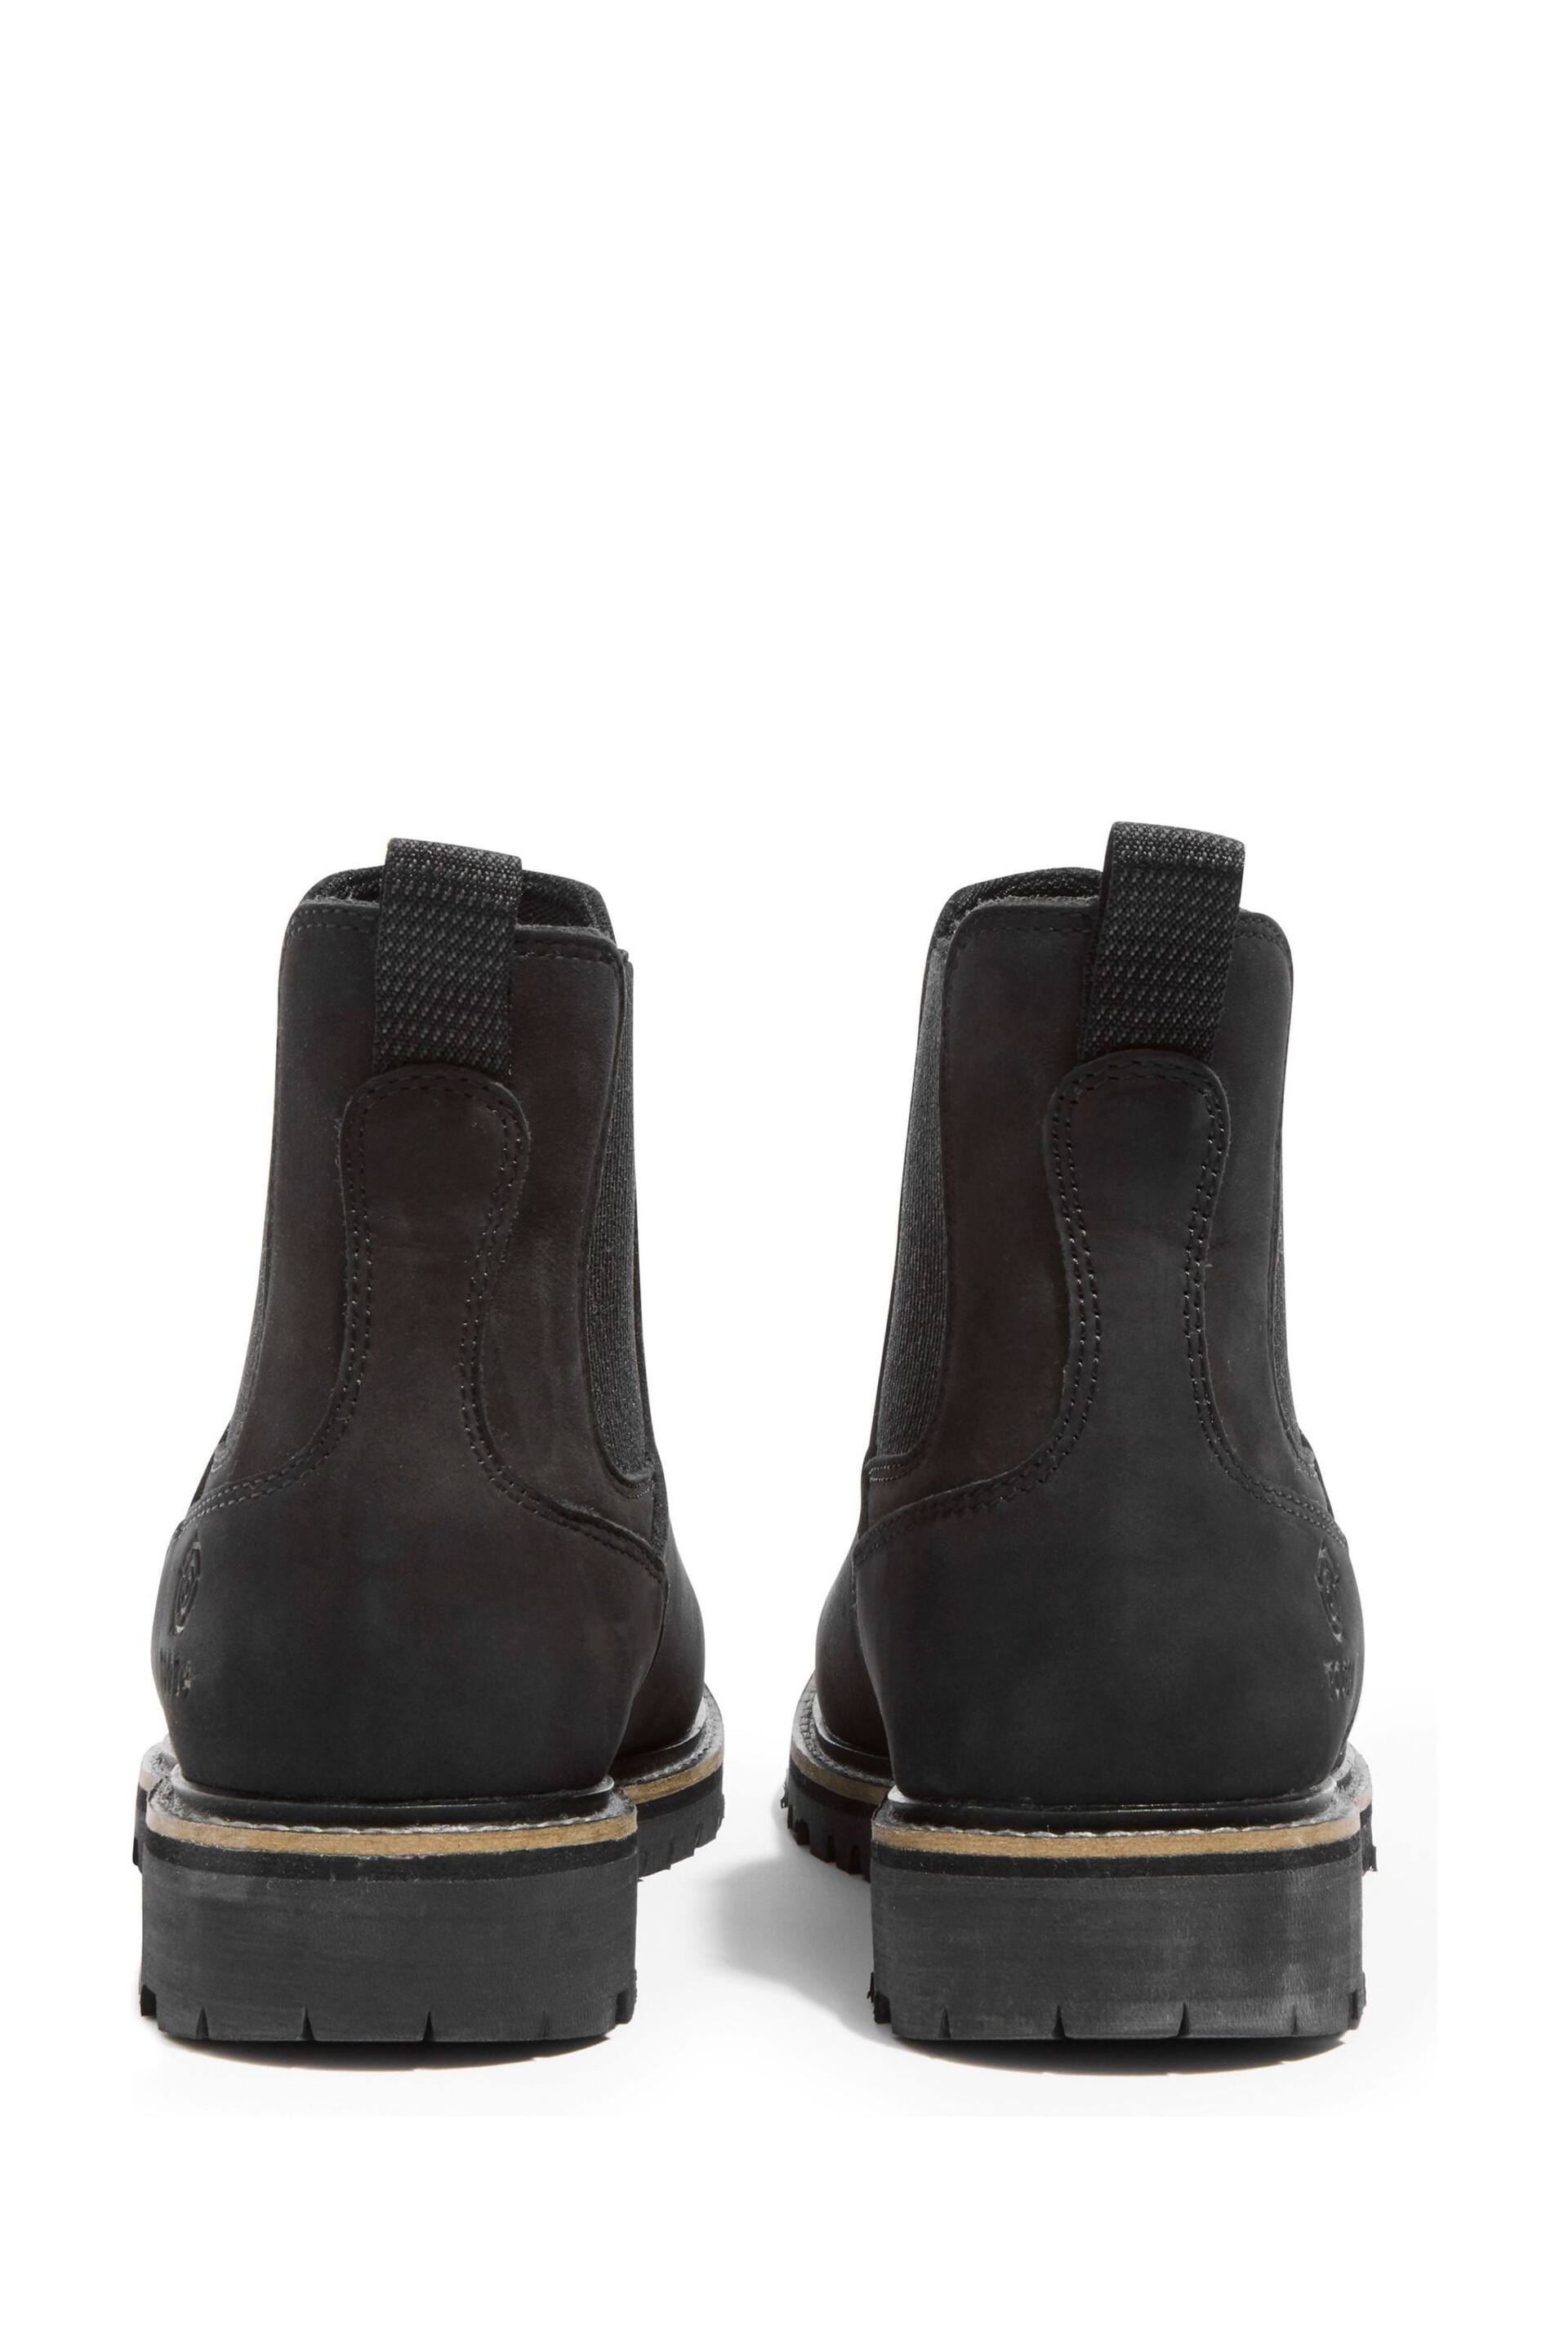 Tog 24 Black Canyon Chelsea Boots - Image 6 of 7